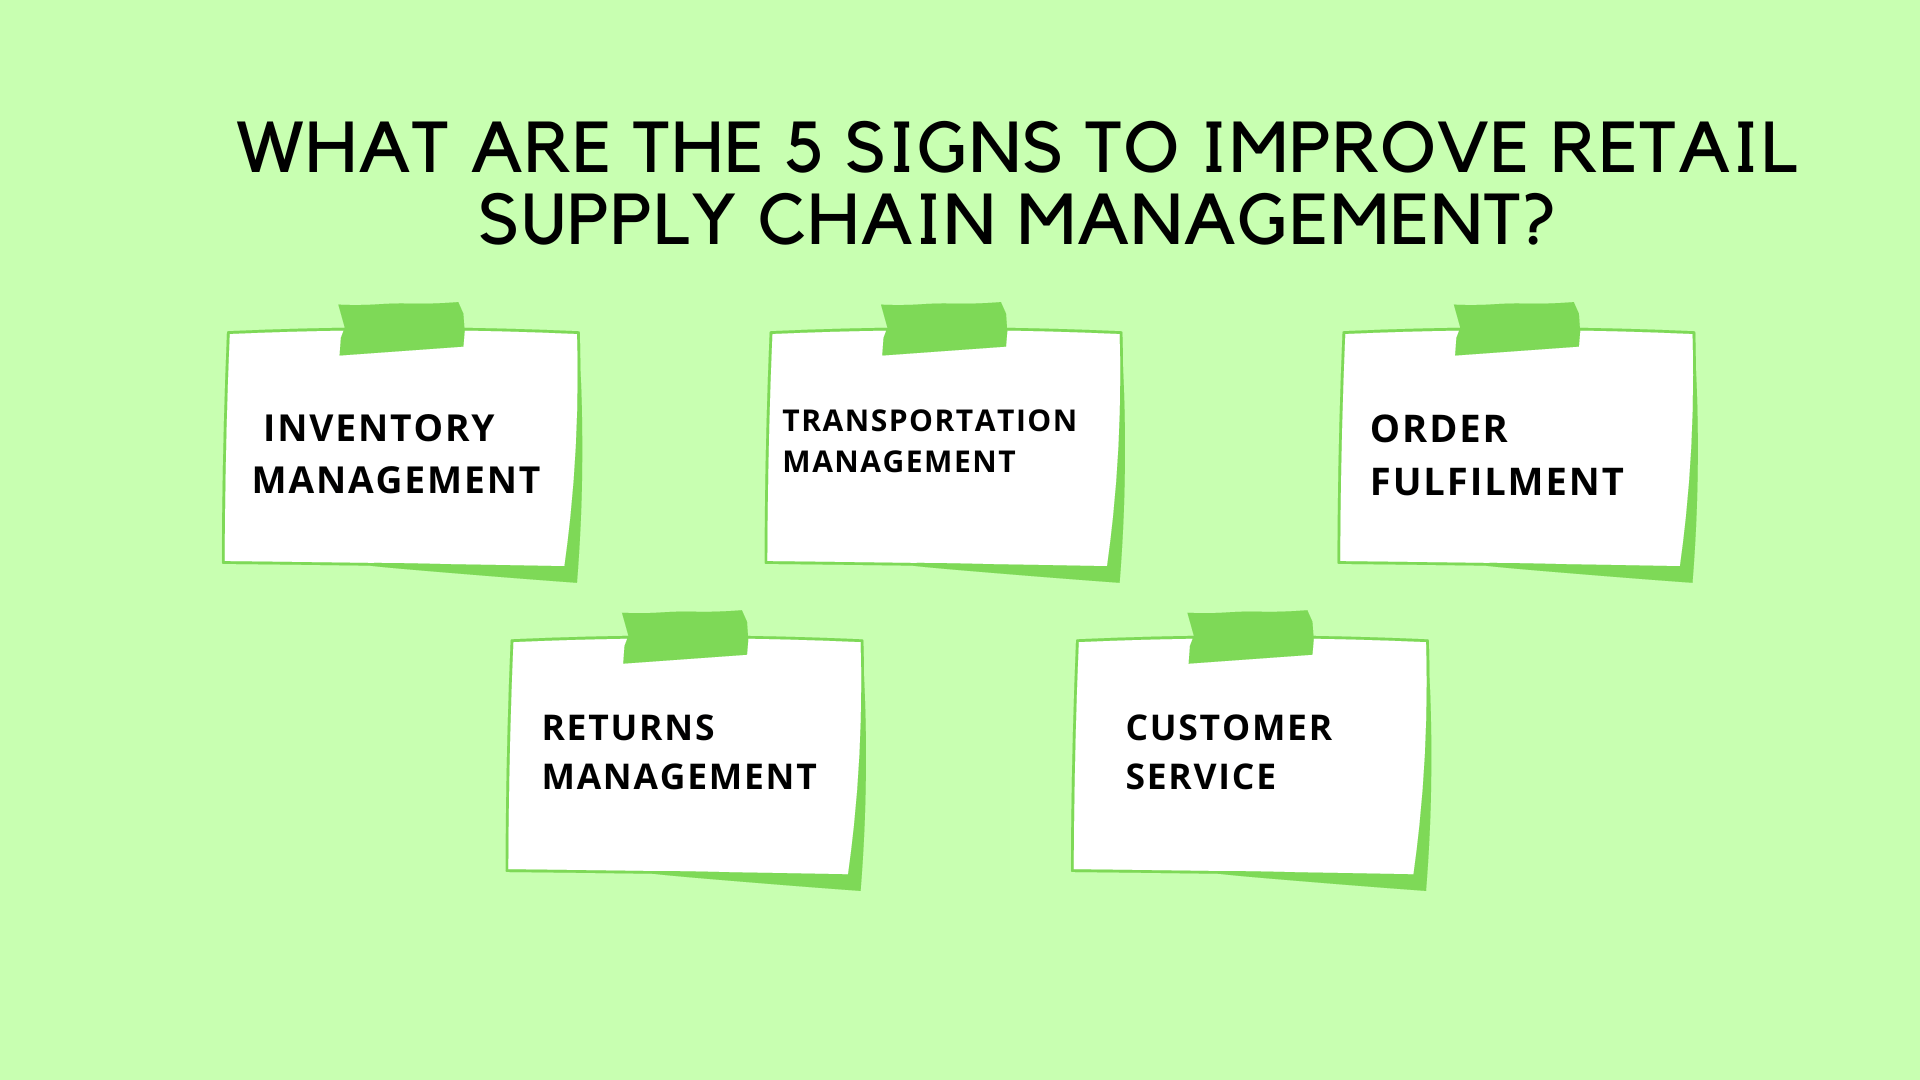 What are the 5 signs to improve retail supply chain management?